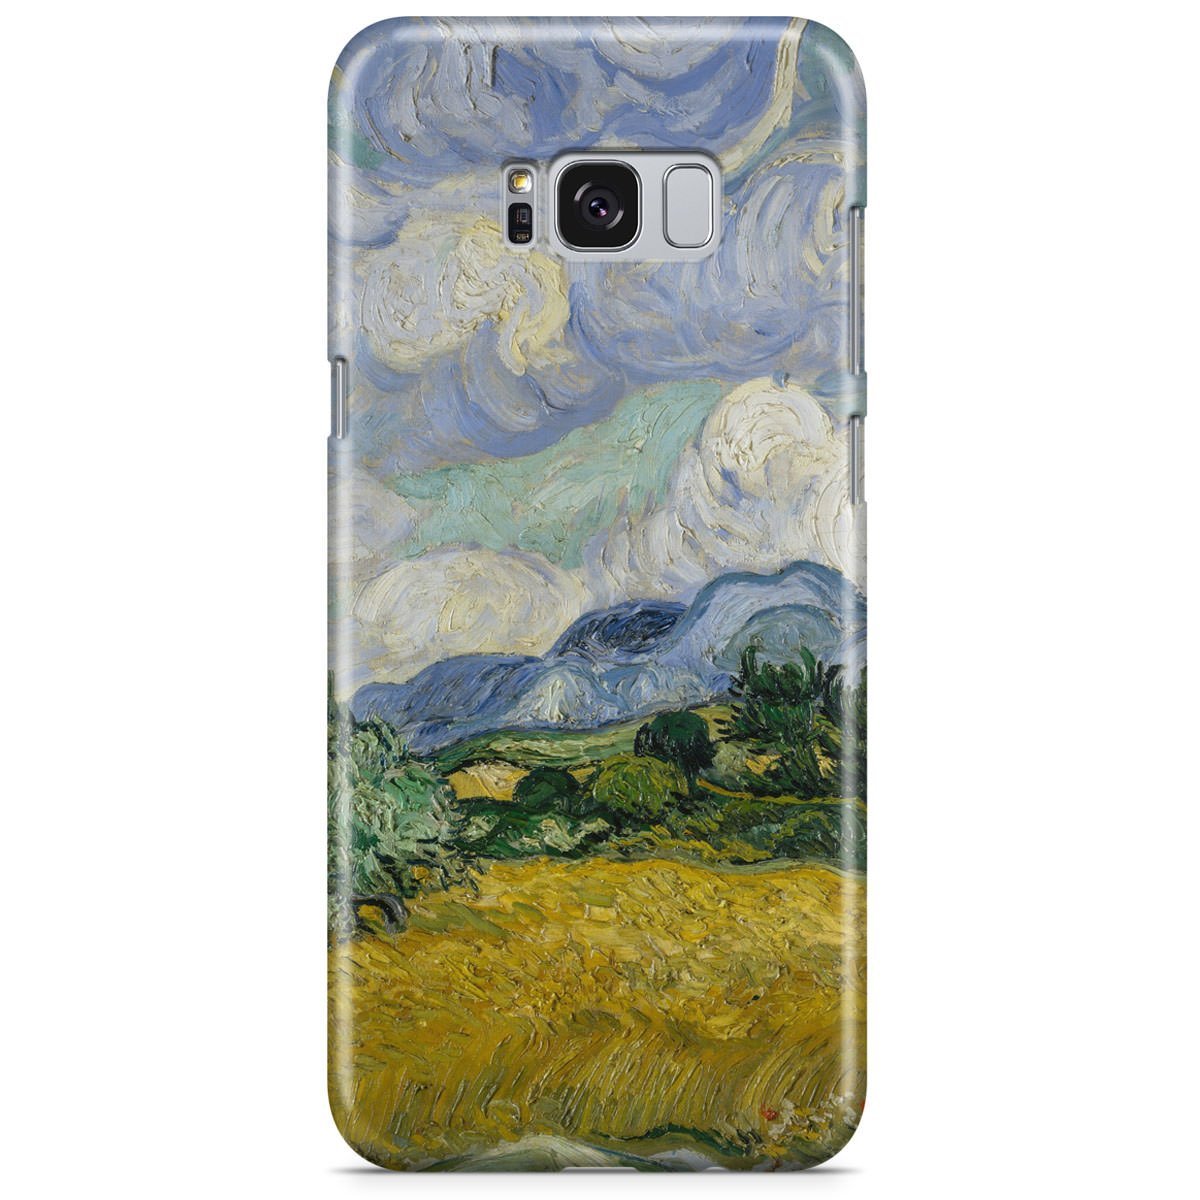 Queen of Cases Hard Shell Phone Case - Vincent Van Gogh Fine Art Painting